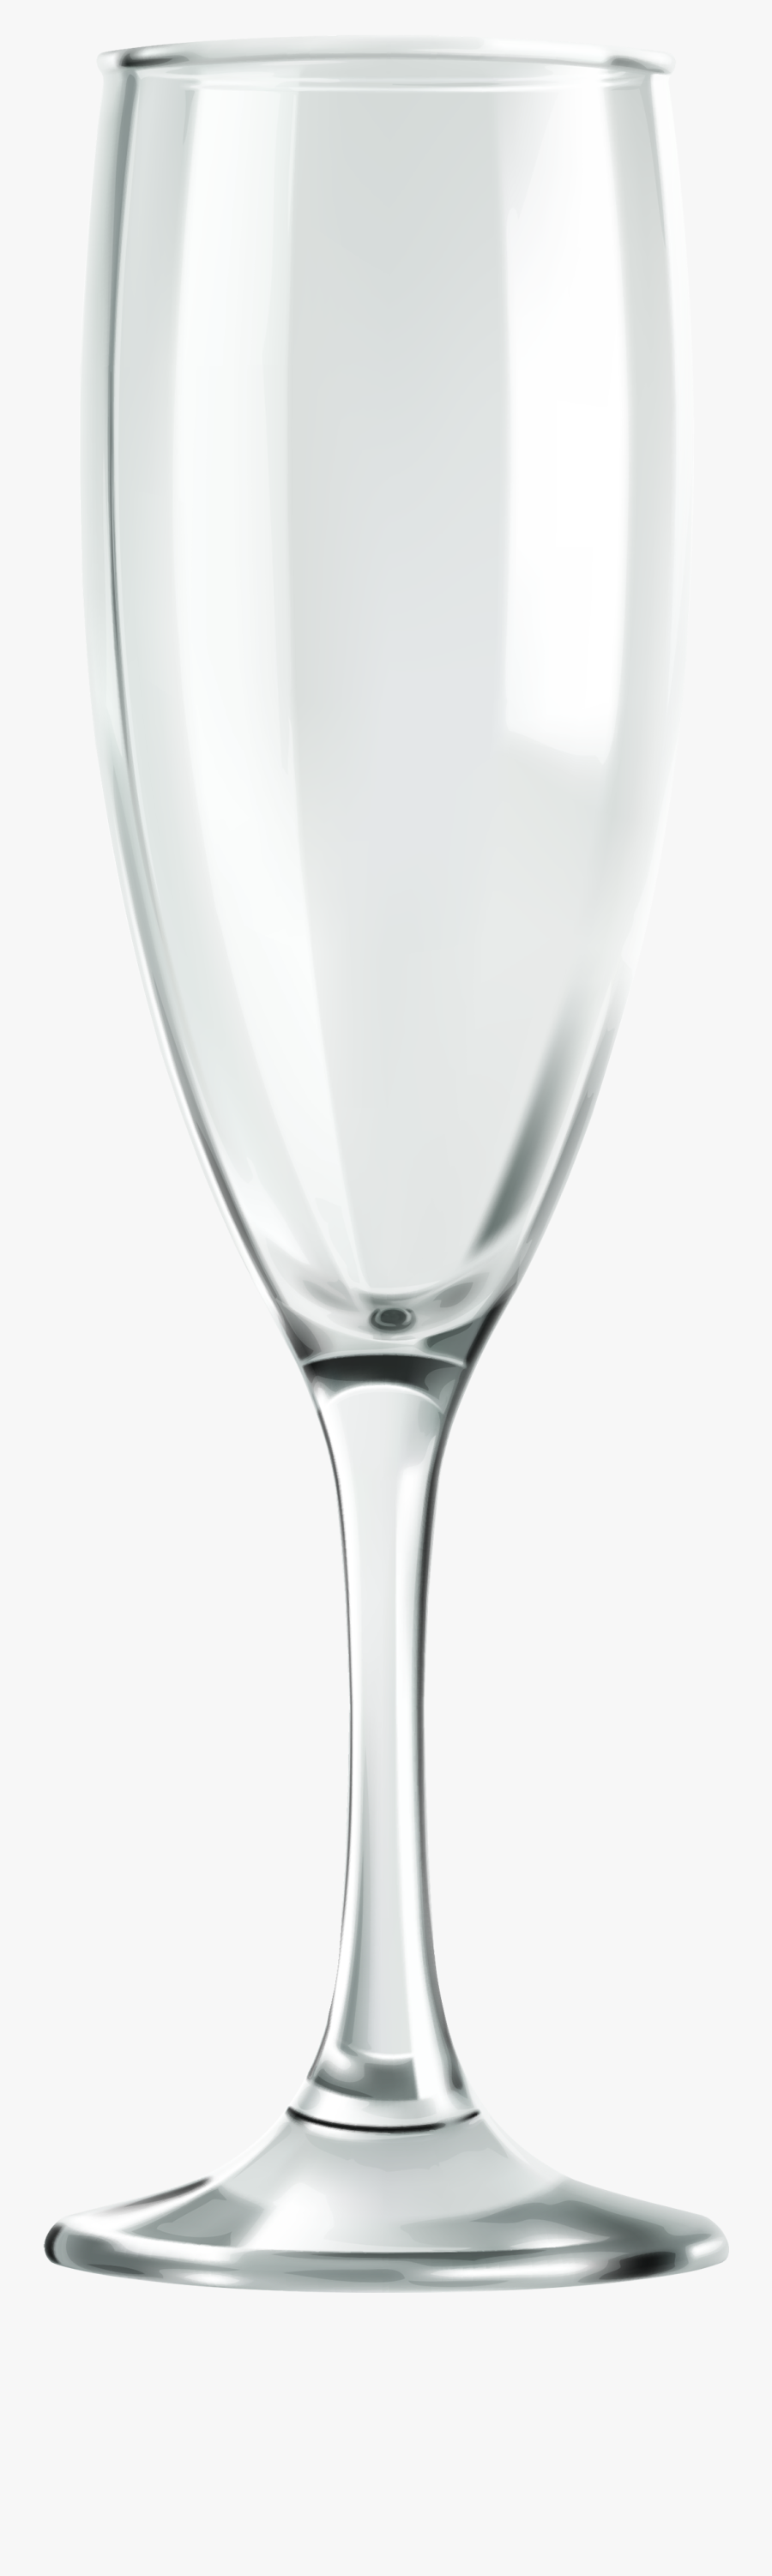 Champagne Glass Png Clipart - Wine Glass, Transparent Clipart